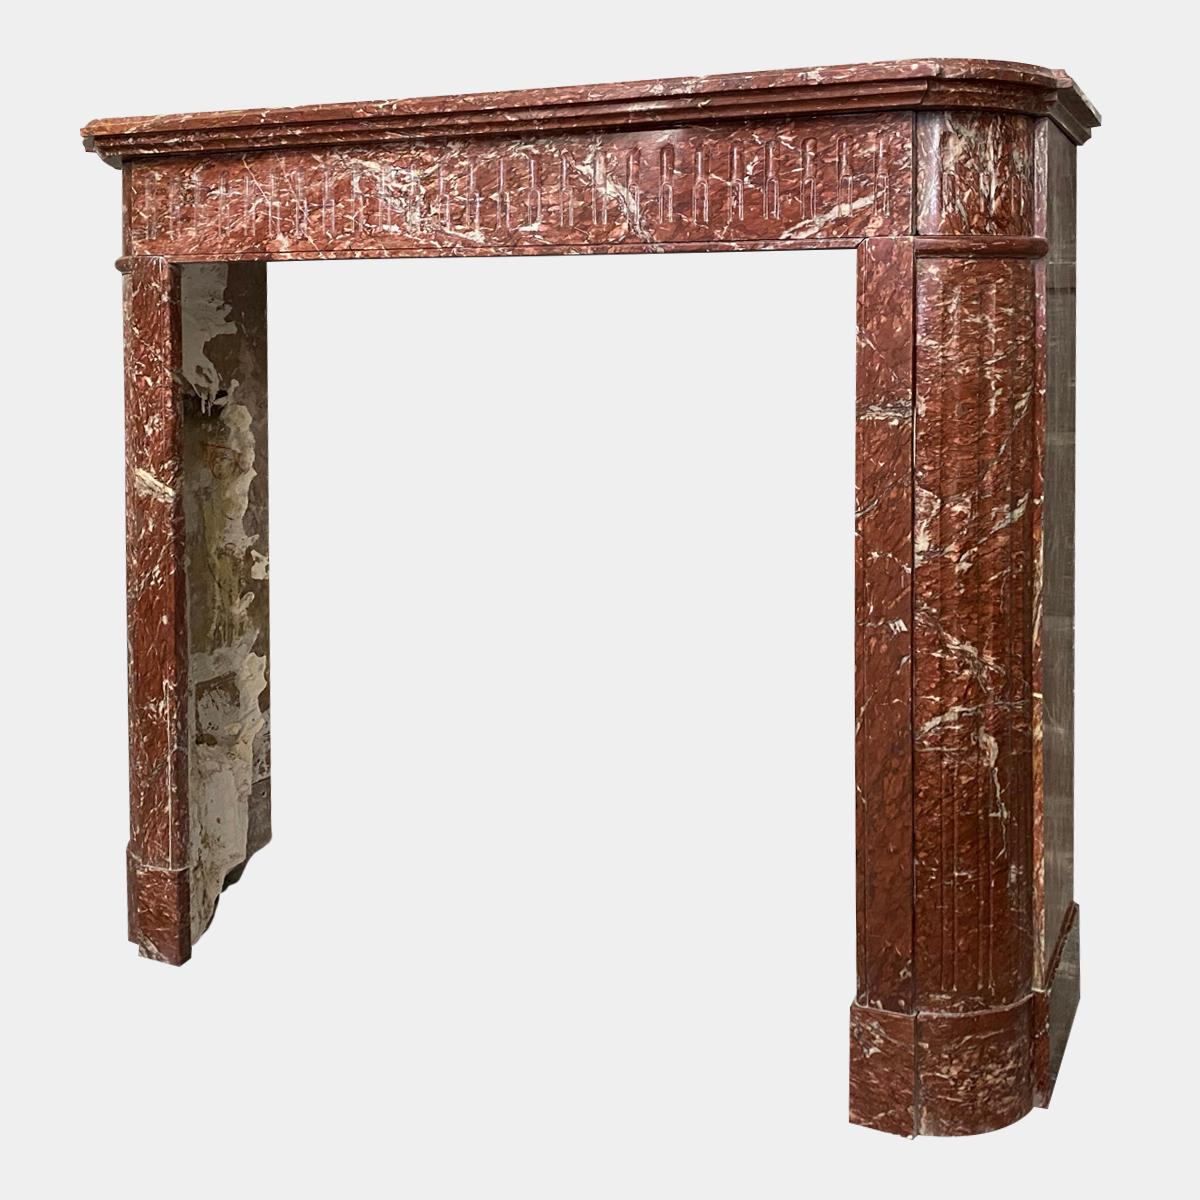 A 19th century petit Louis XVI style fireplace in quality Rouge de Saint Pons marble. The canted jambs with stop flutes panels surmounted by conforming stop fluted corner blocks, flanking a running stop fluted frieze. All beneath a stepped and